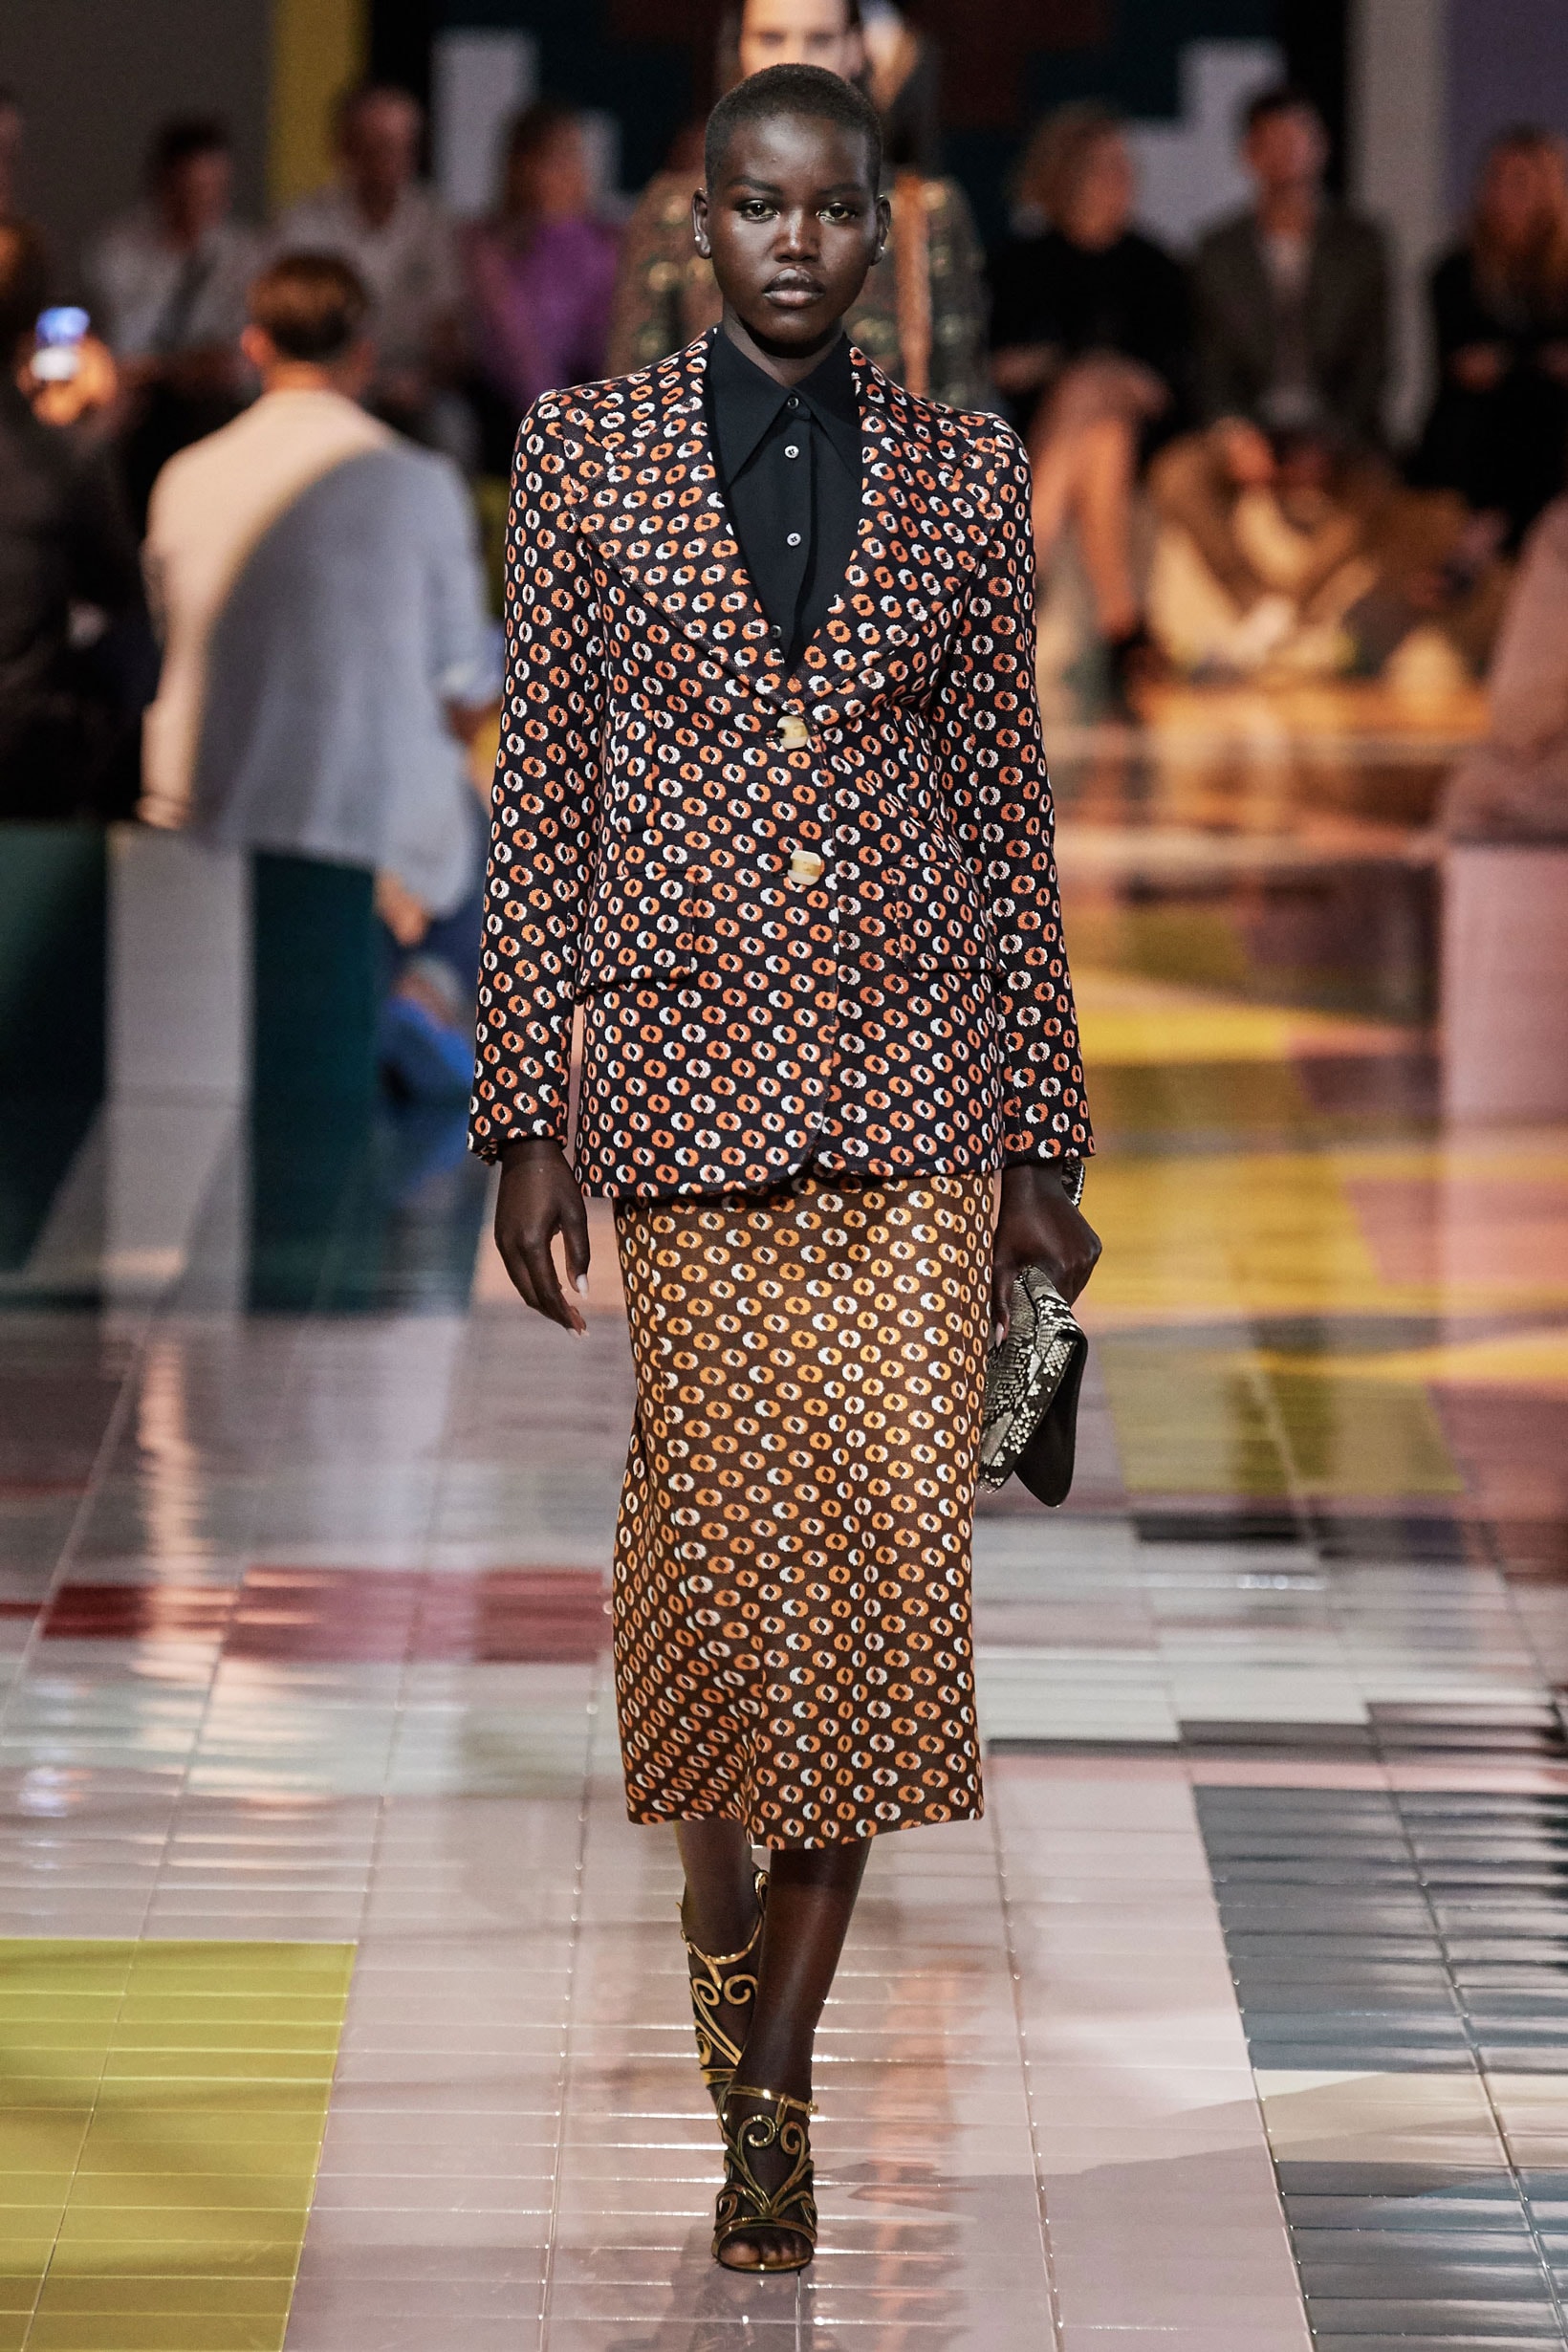 Catwalk: The Complete Fashion Collections - Prada